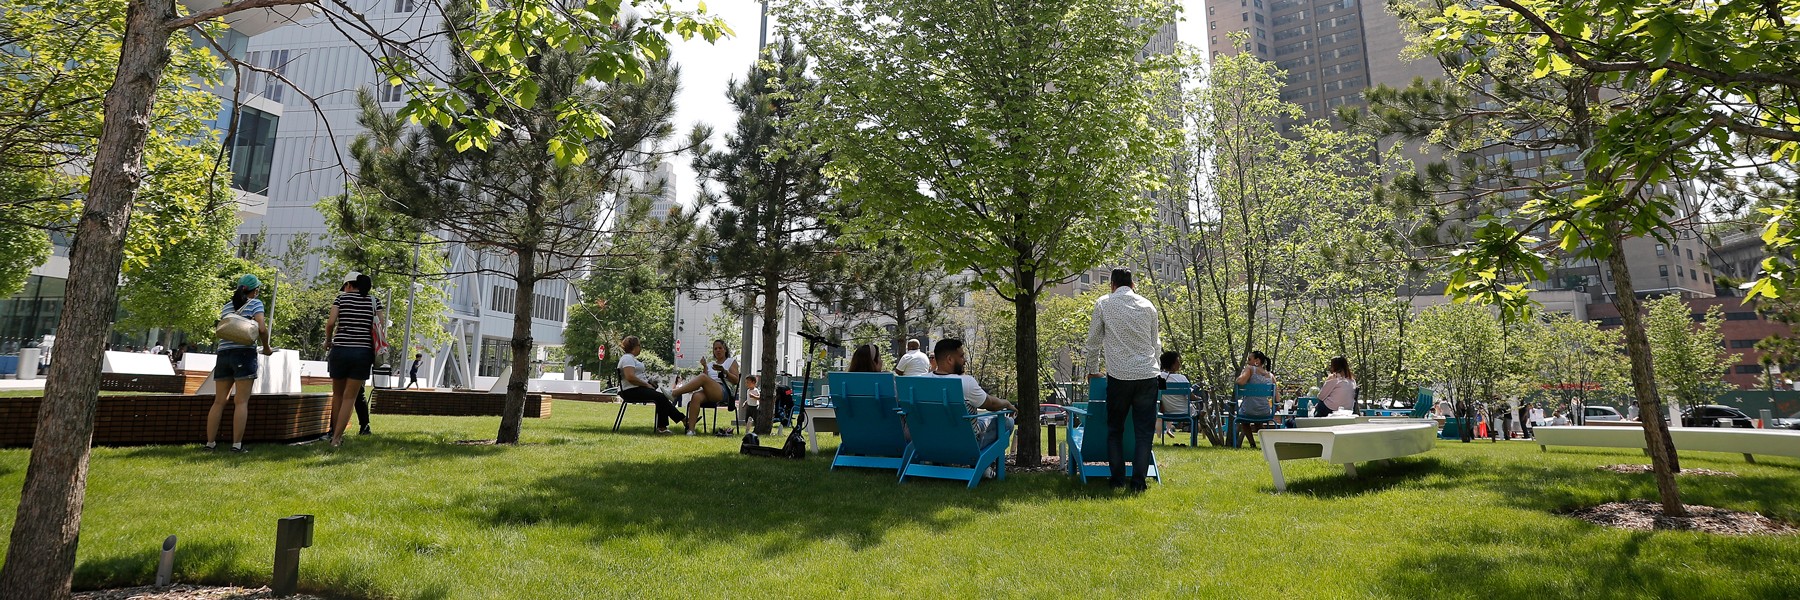 A vibrant, green area with trees, seats, and people casually lounging.